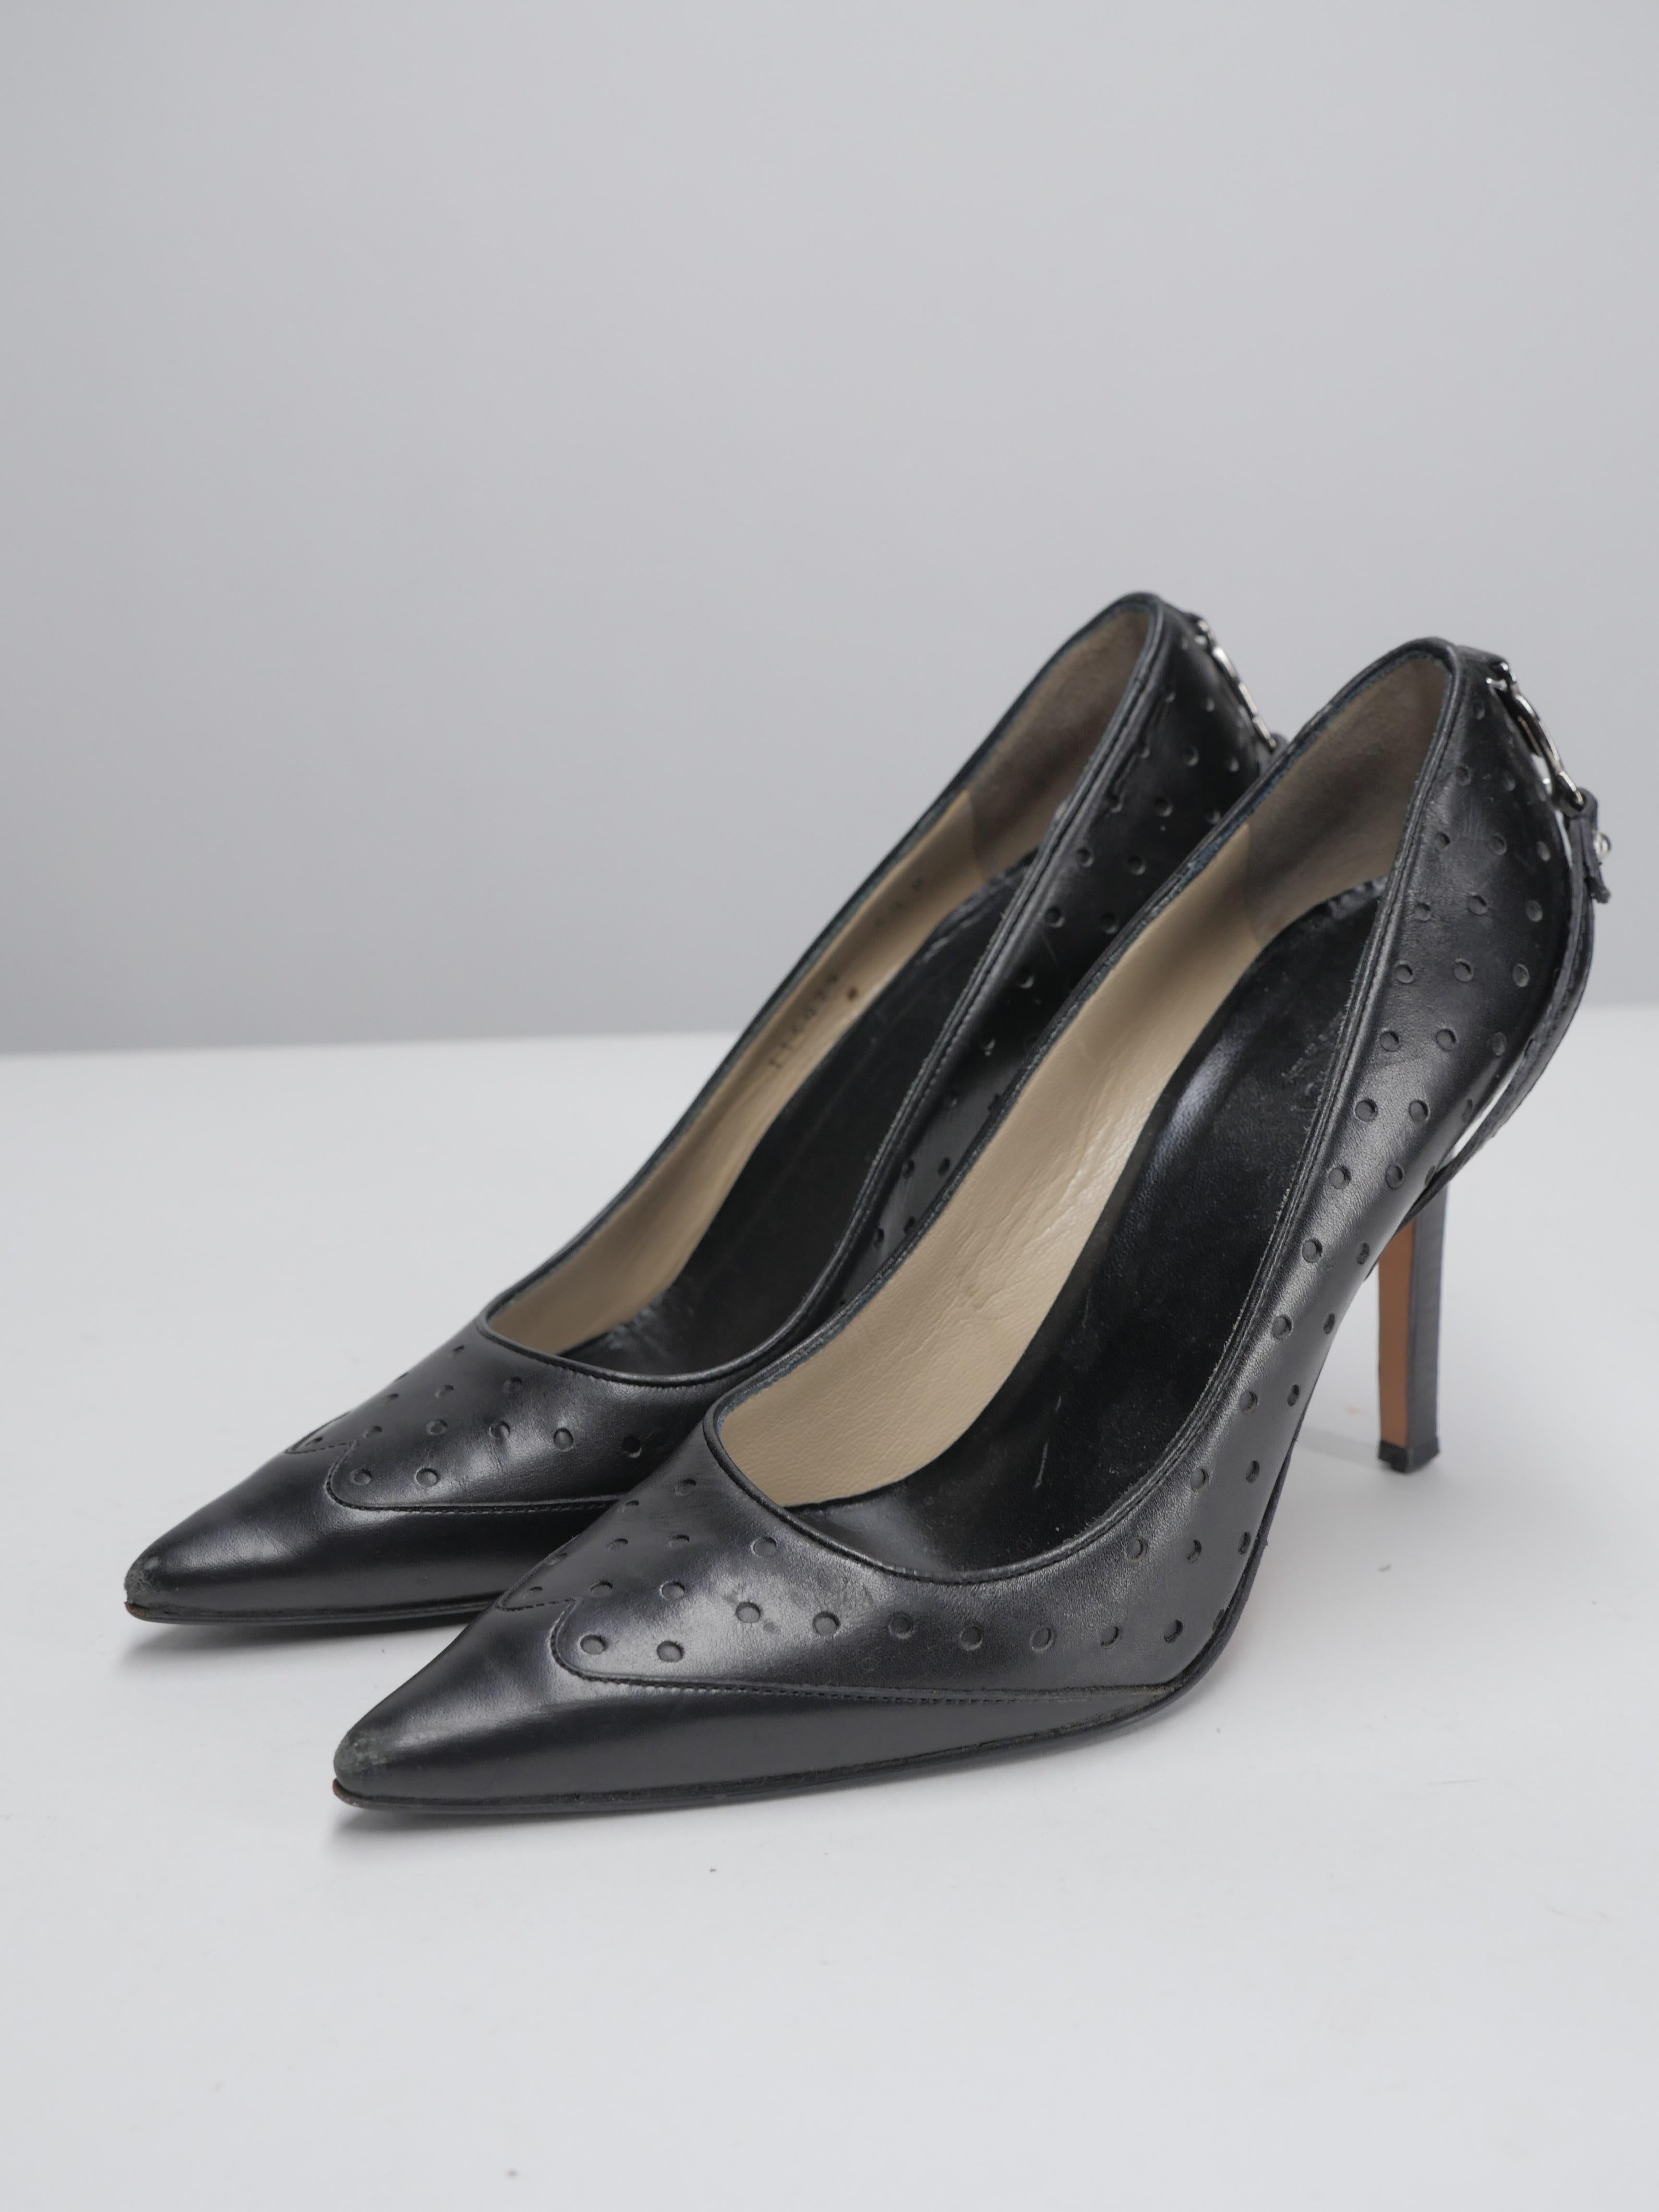 Gucci 6.5 Black Leather Perforated Pumps, Silver Logo emblem on heel